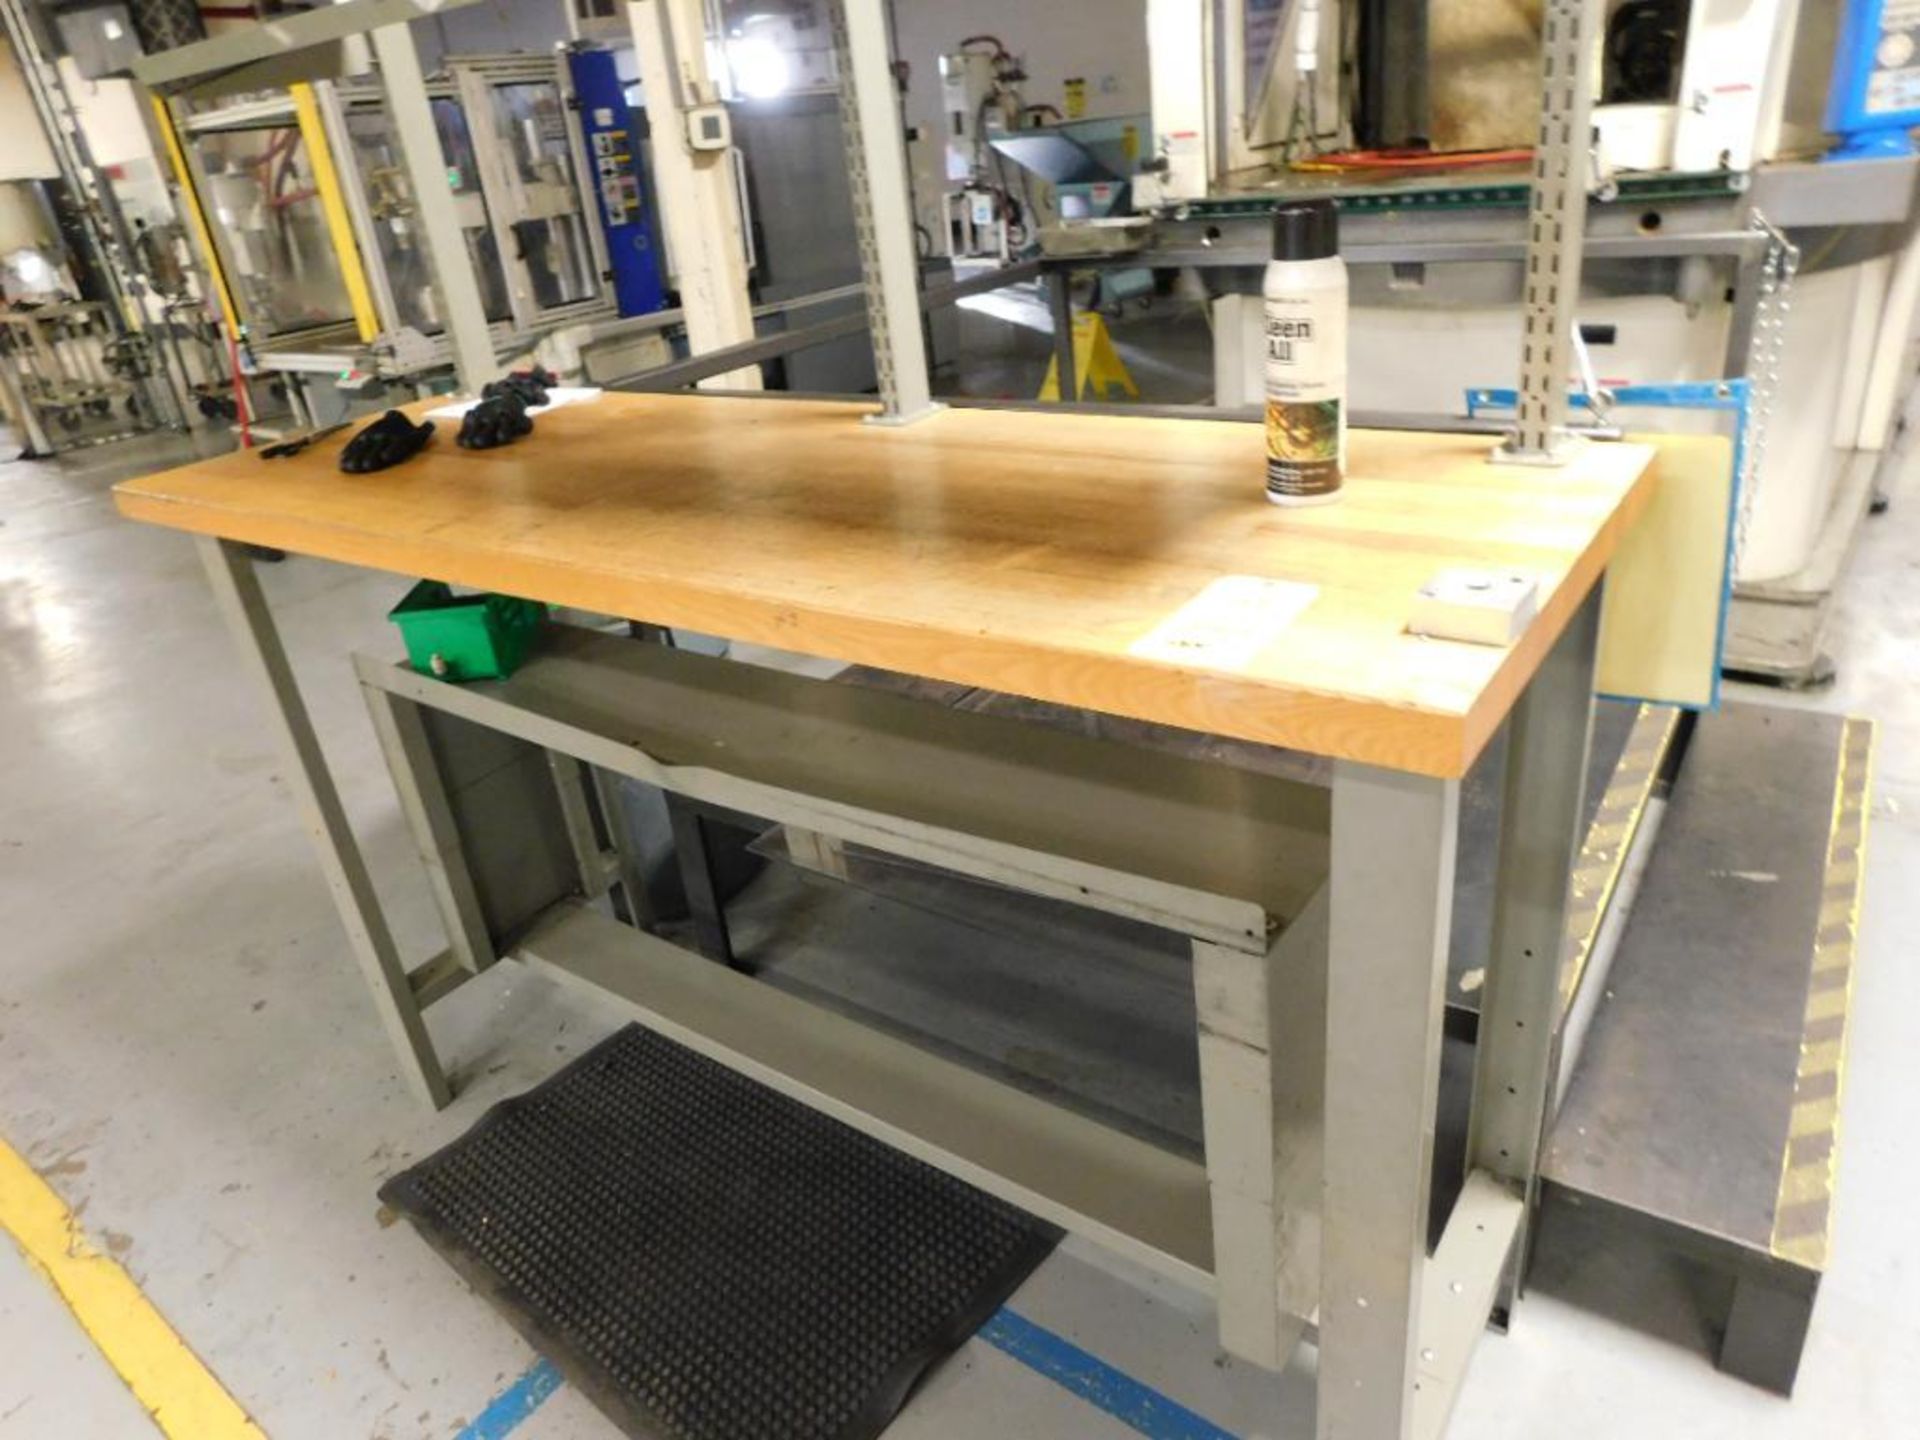 LOT: 30" x 72", 30" x 48", 24" x 72" Maple Top Workbenches, Rolling Steel Cabinet